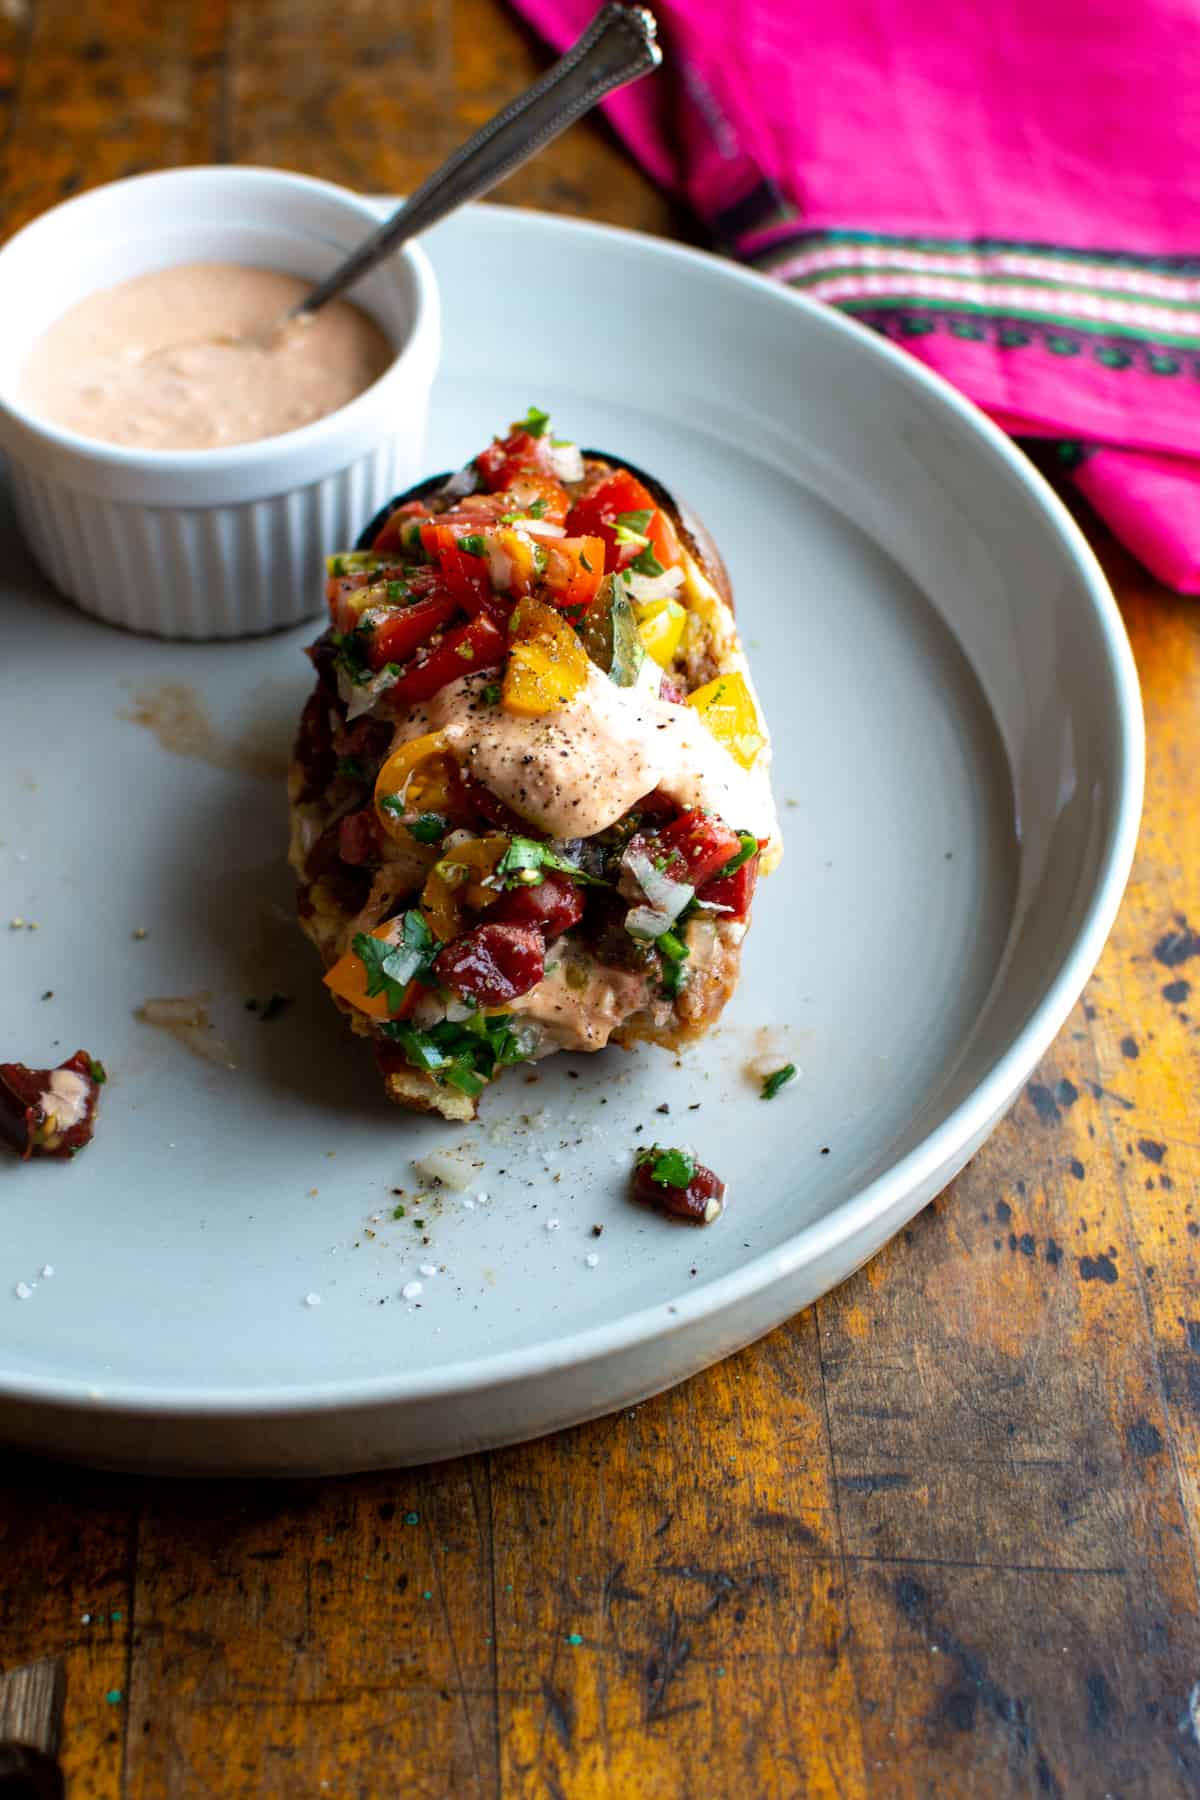 Mexican Molletes are an open faced sandwich layered with refried beans, melted cheese, and fresh pico de gallo. This no-fuss, vegetarian meal is great for breakfast, lunch or dinner and is extra good with a dollop of roasted garlic-tomato crema on top! #molletes #Mexicanmolletes #vegetarianMexican #molletesrecipe